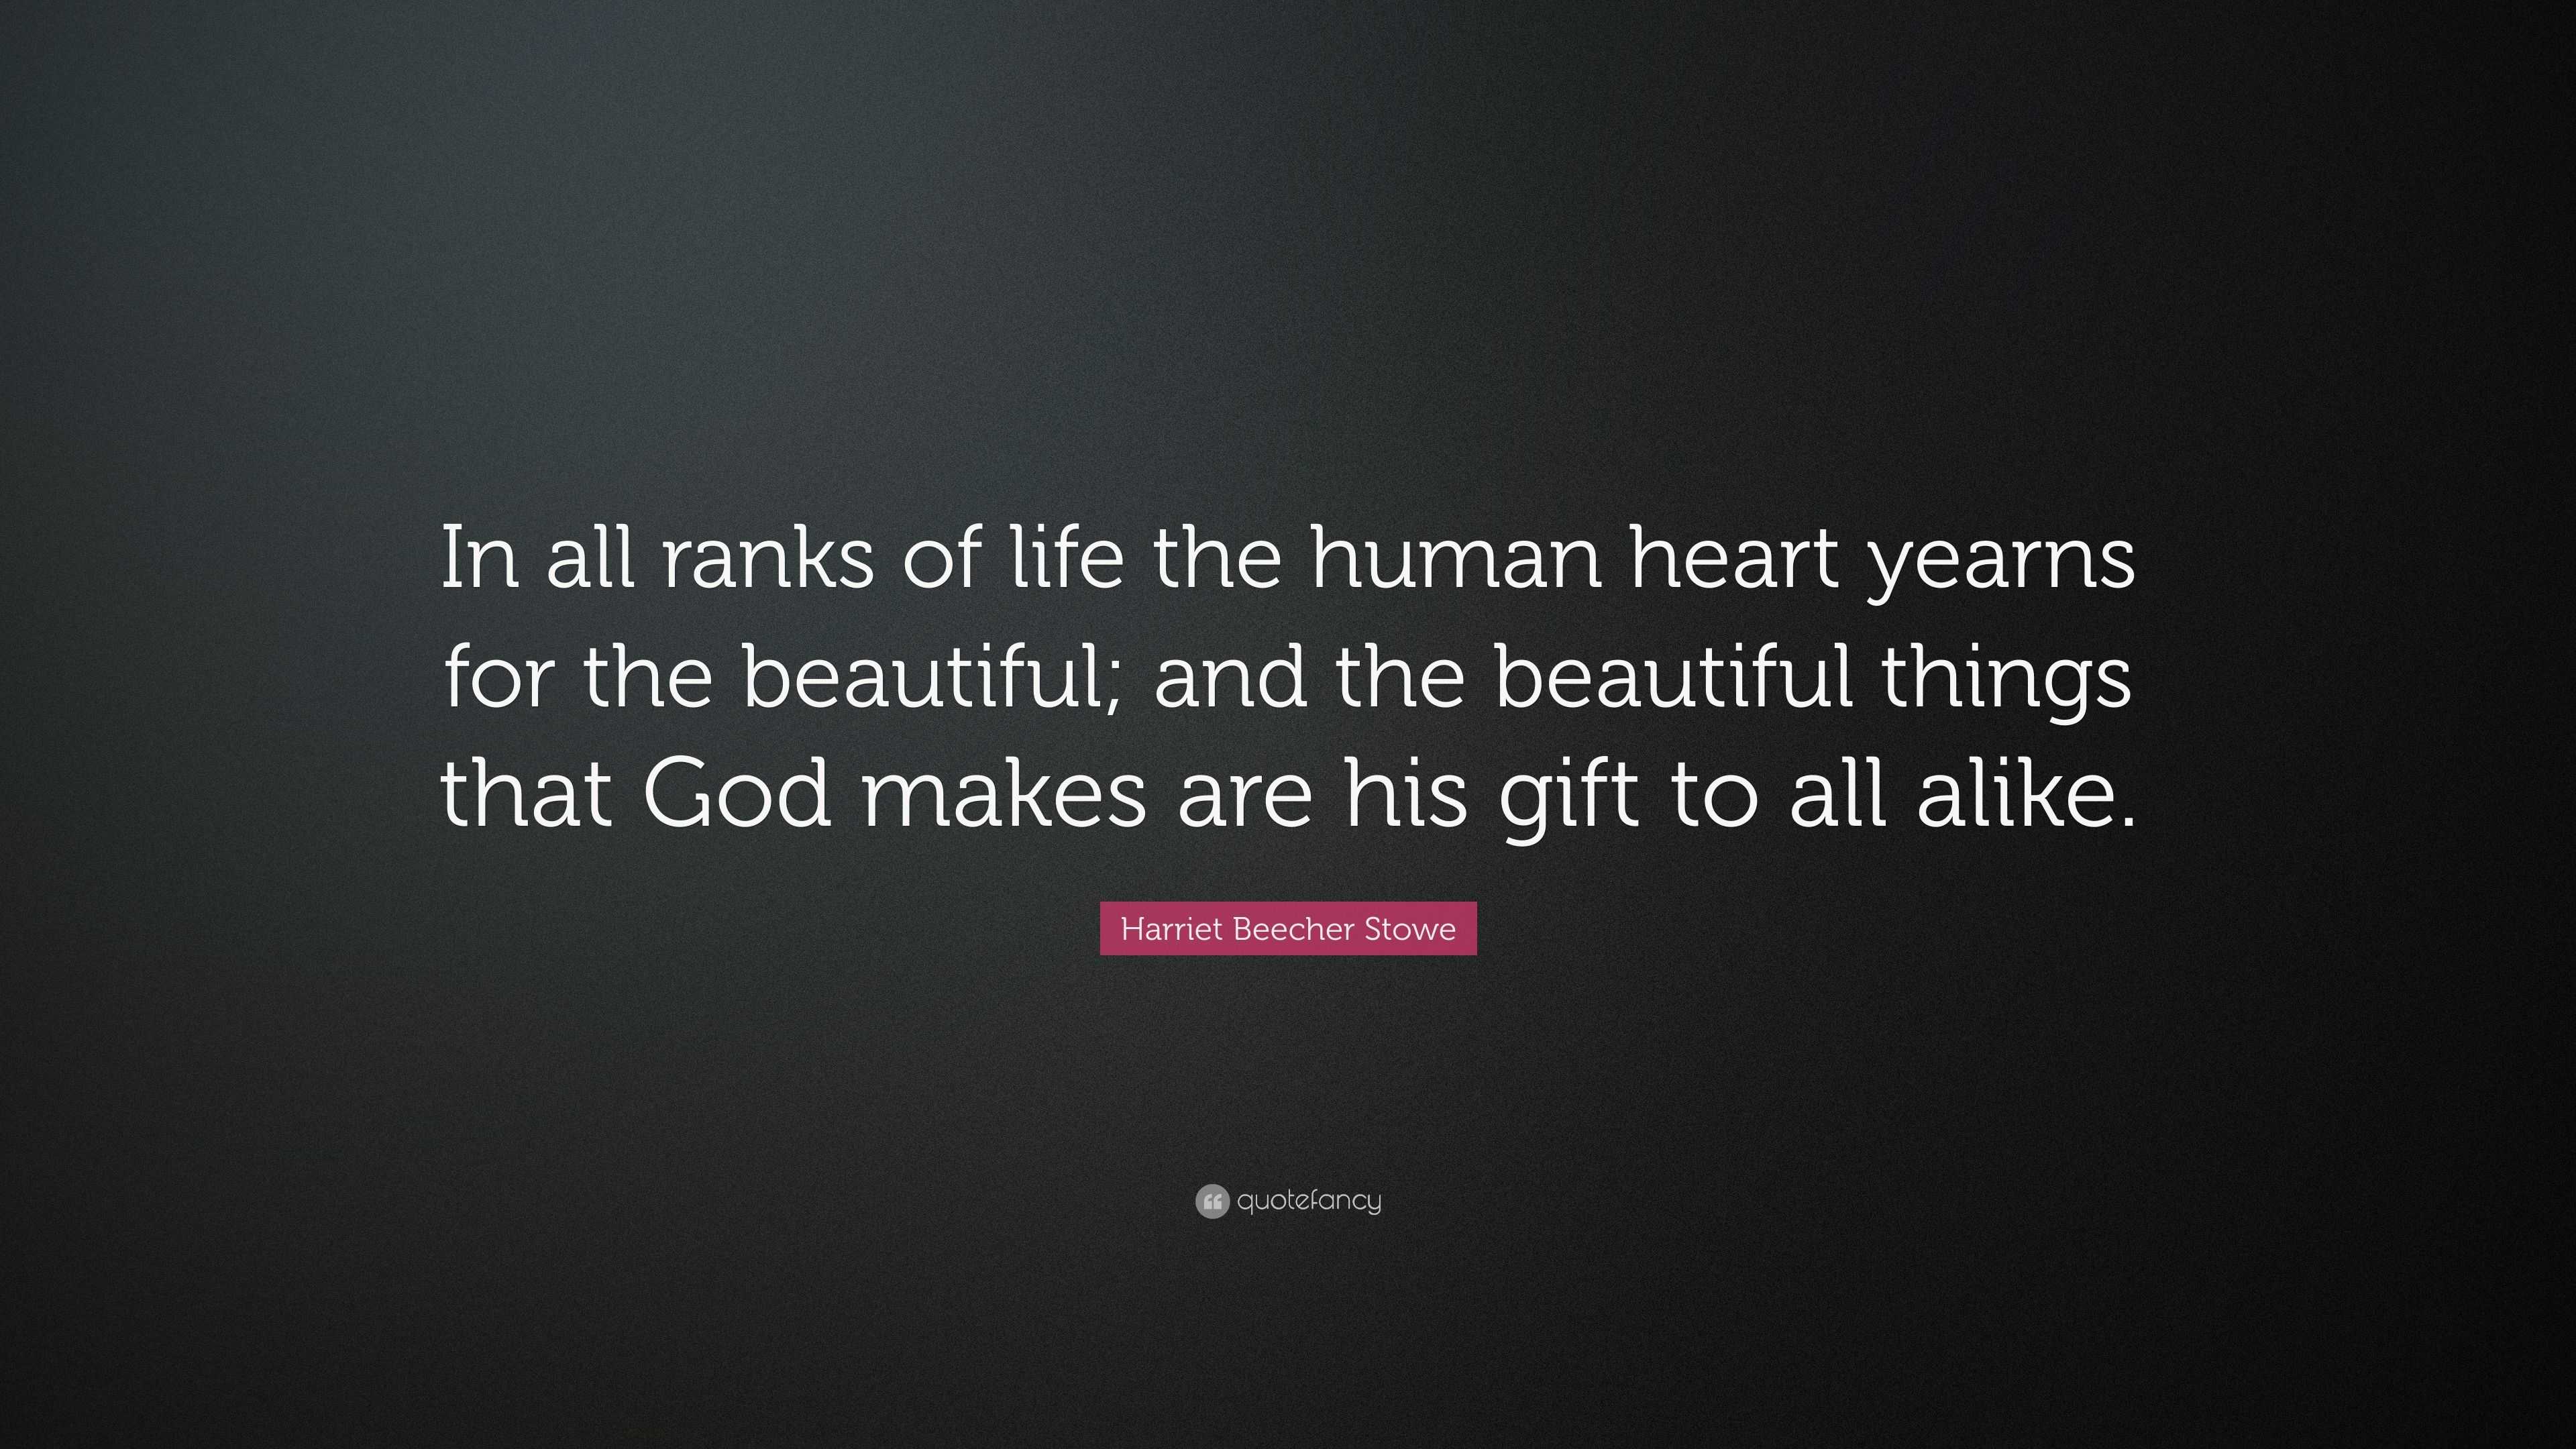 Harriet Beecher Stowe Quote “In all ranks of life the human heart yearns for